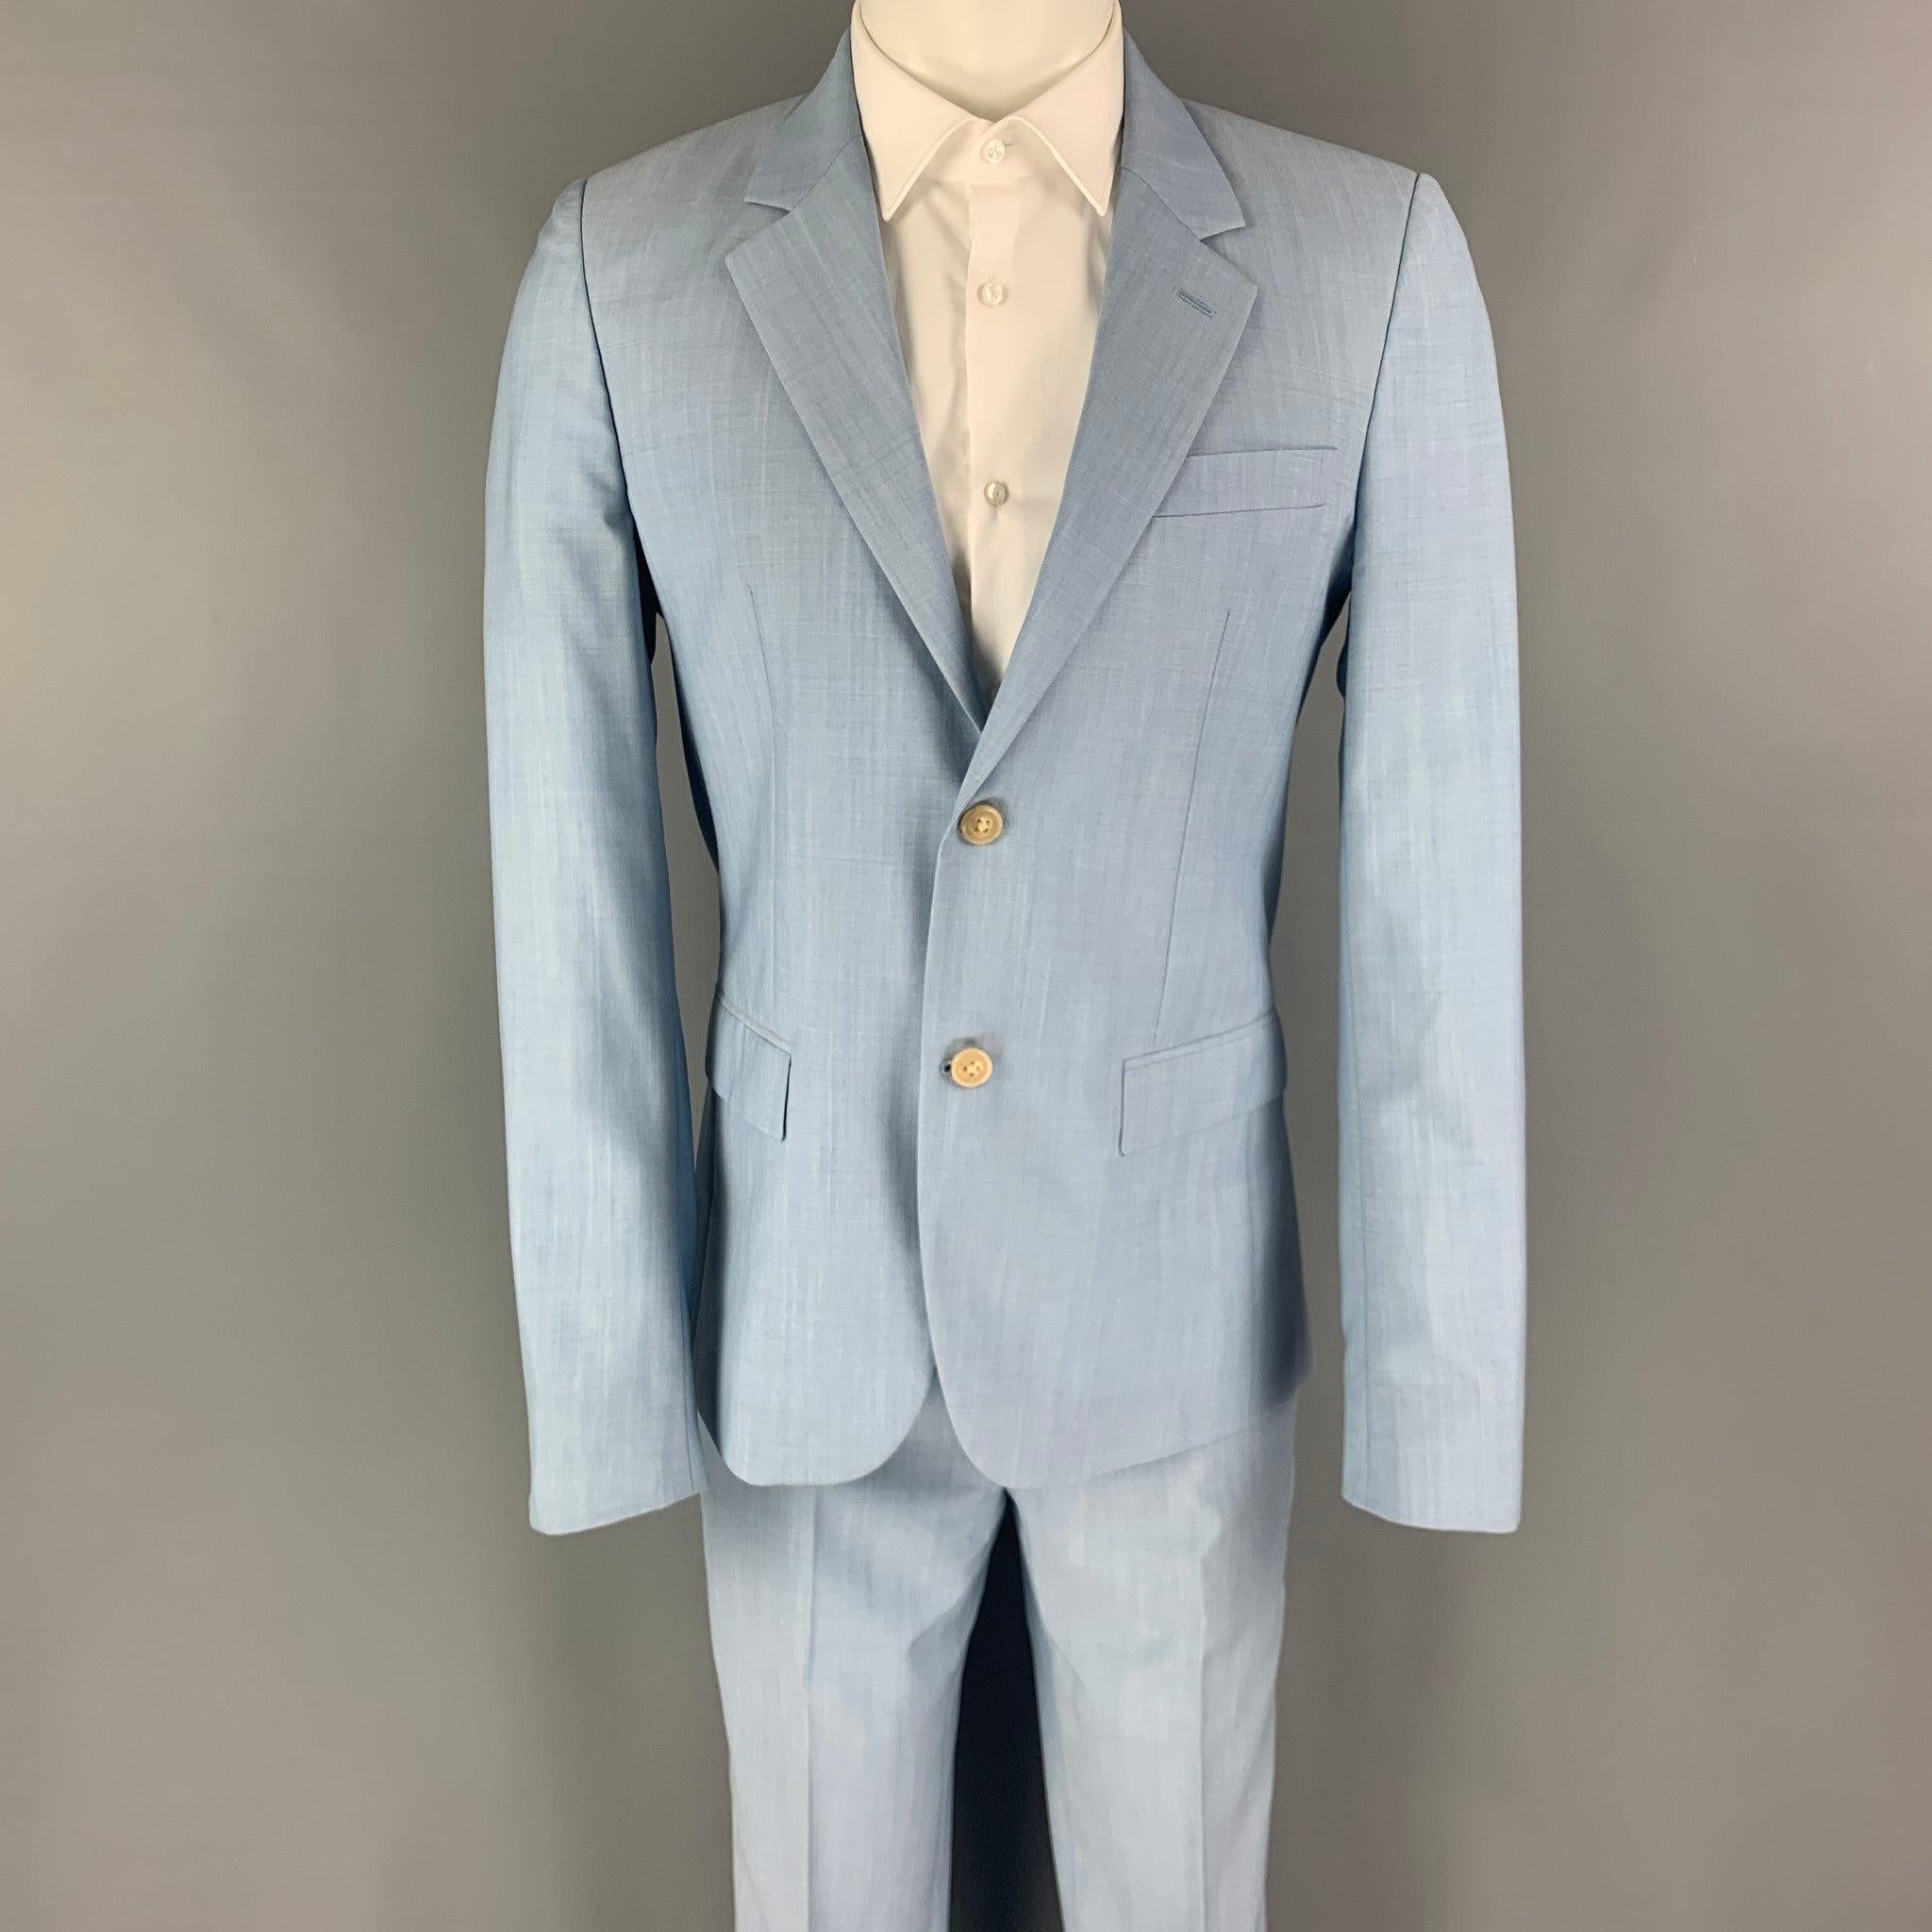 MARC JACOBS
suit comes in a light blue wool with a full liner and includes a single breasted, double button sport coat with notch lapel and matching flat front trousers. Made in Italy. Excellent Pre-Owned Condition. 

Marked:   48 

Measurements: 
 